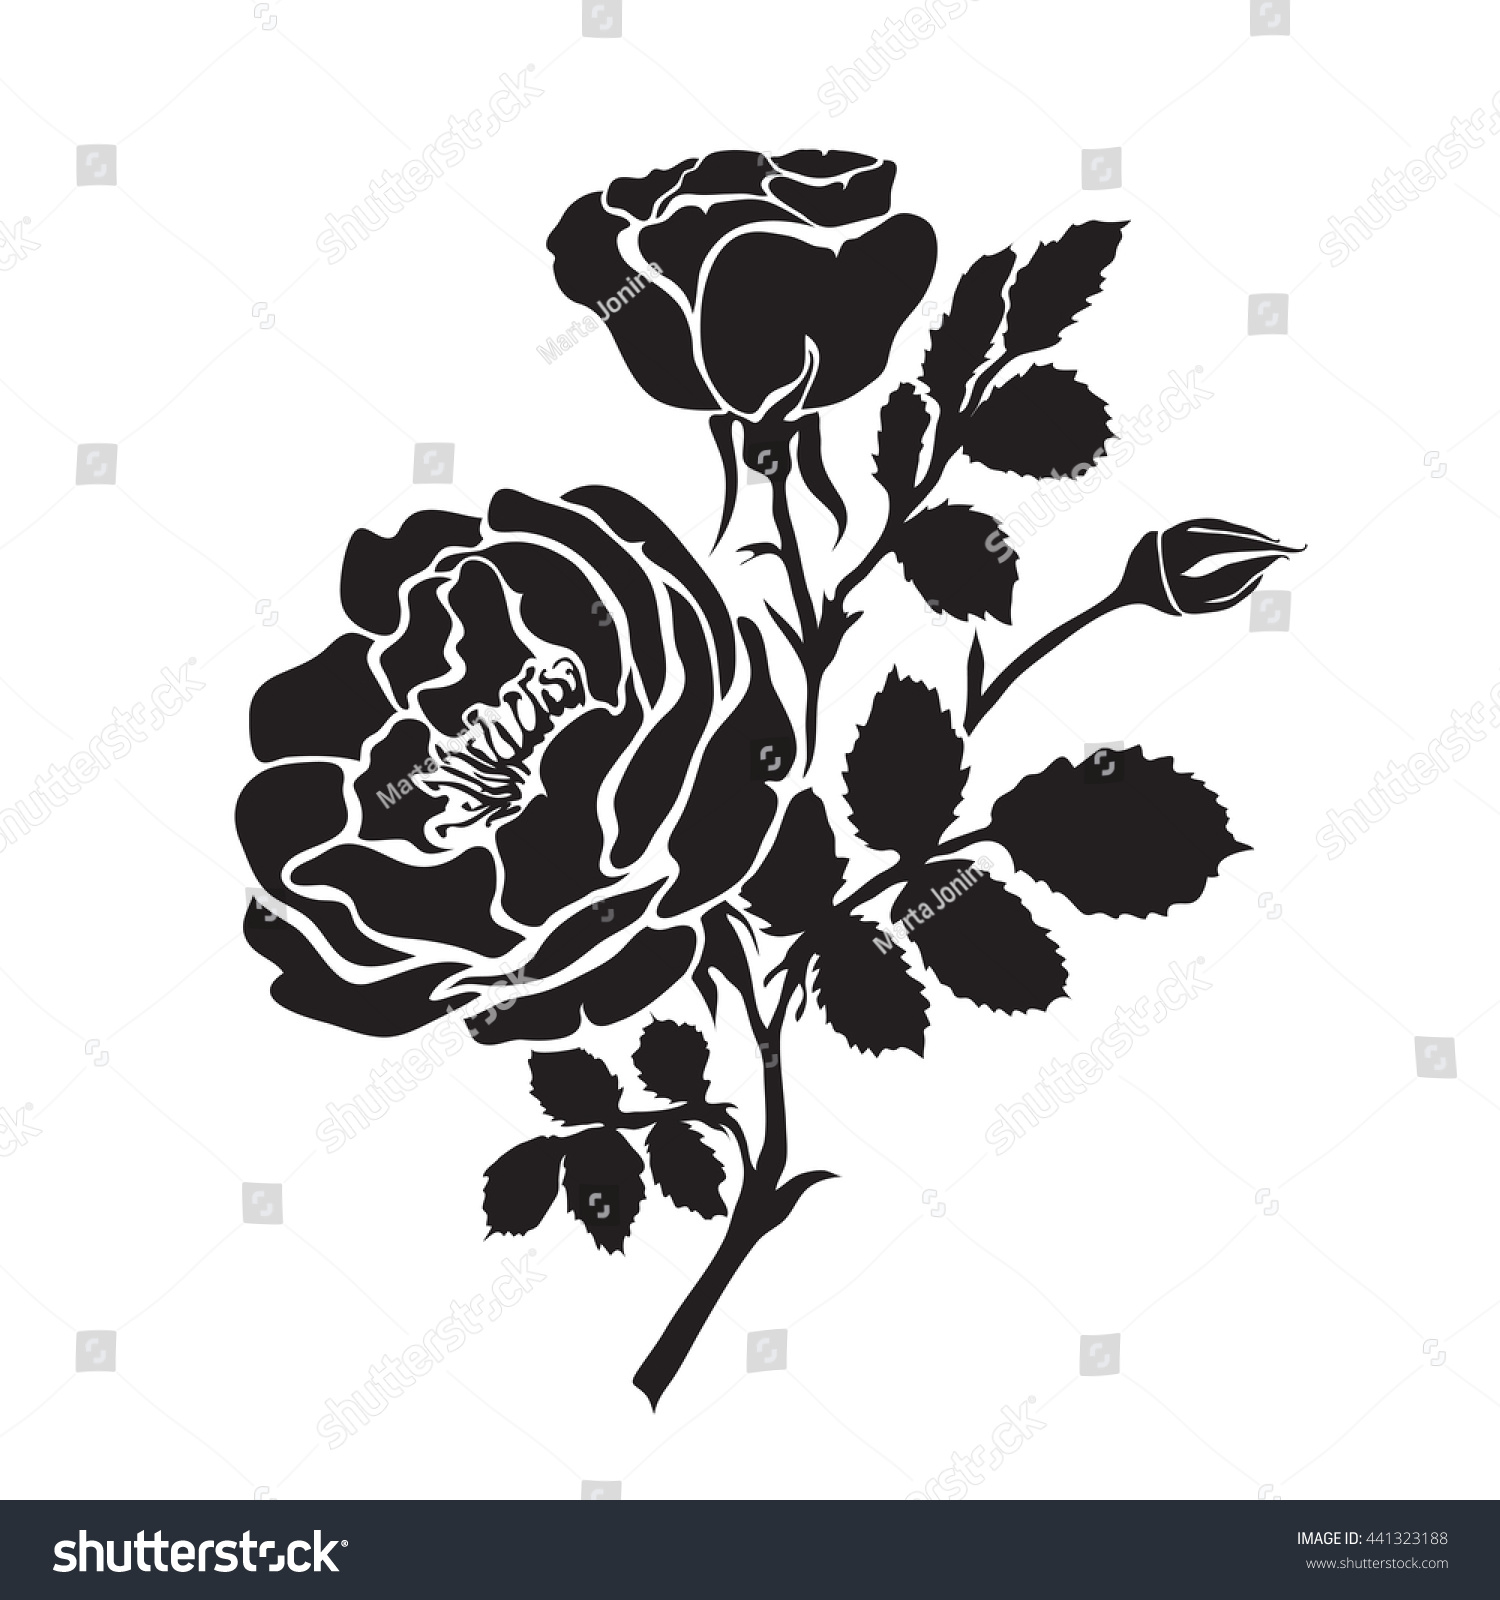 Silhouette Rose Branch Opened Flowers Buds Stock Vector 441323188 ...